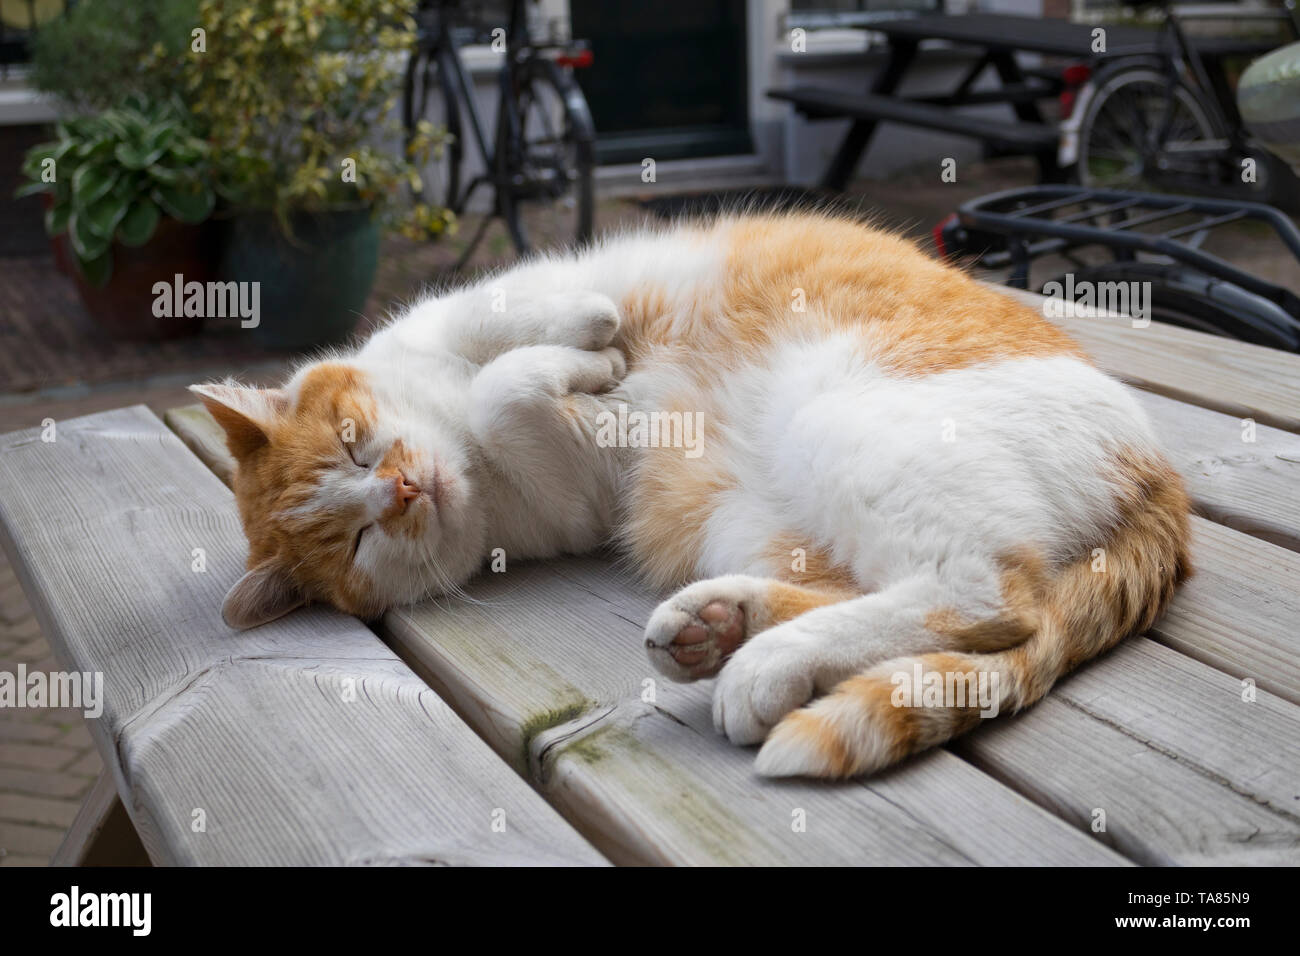 Relaxed sleeping red and white cat on a wooden garden table Stock Photo